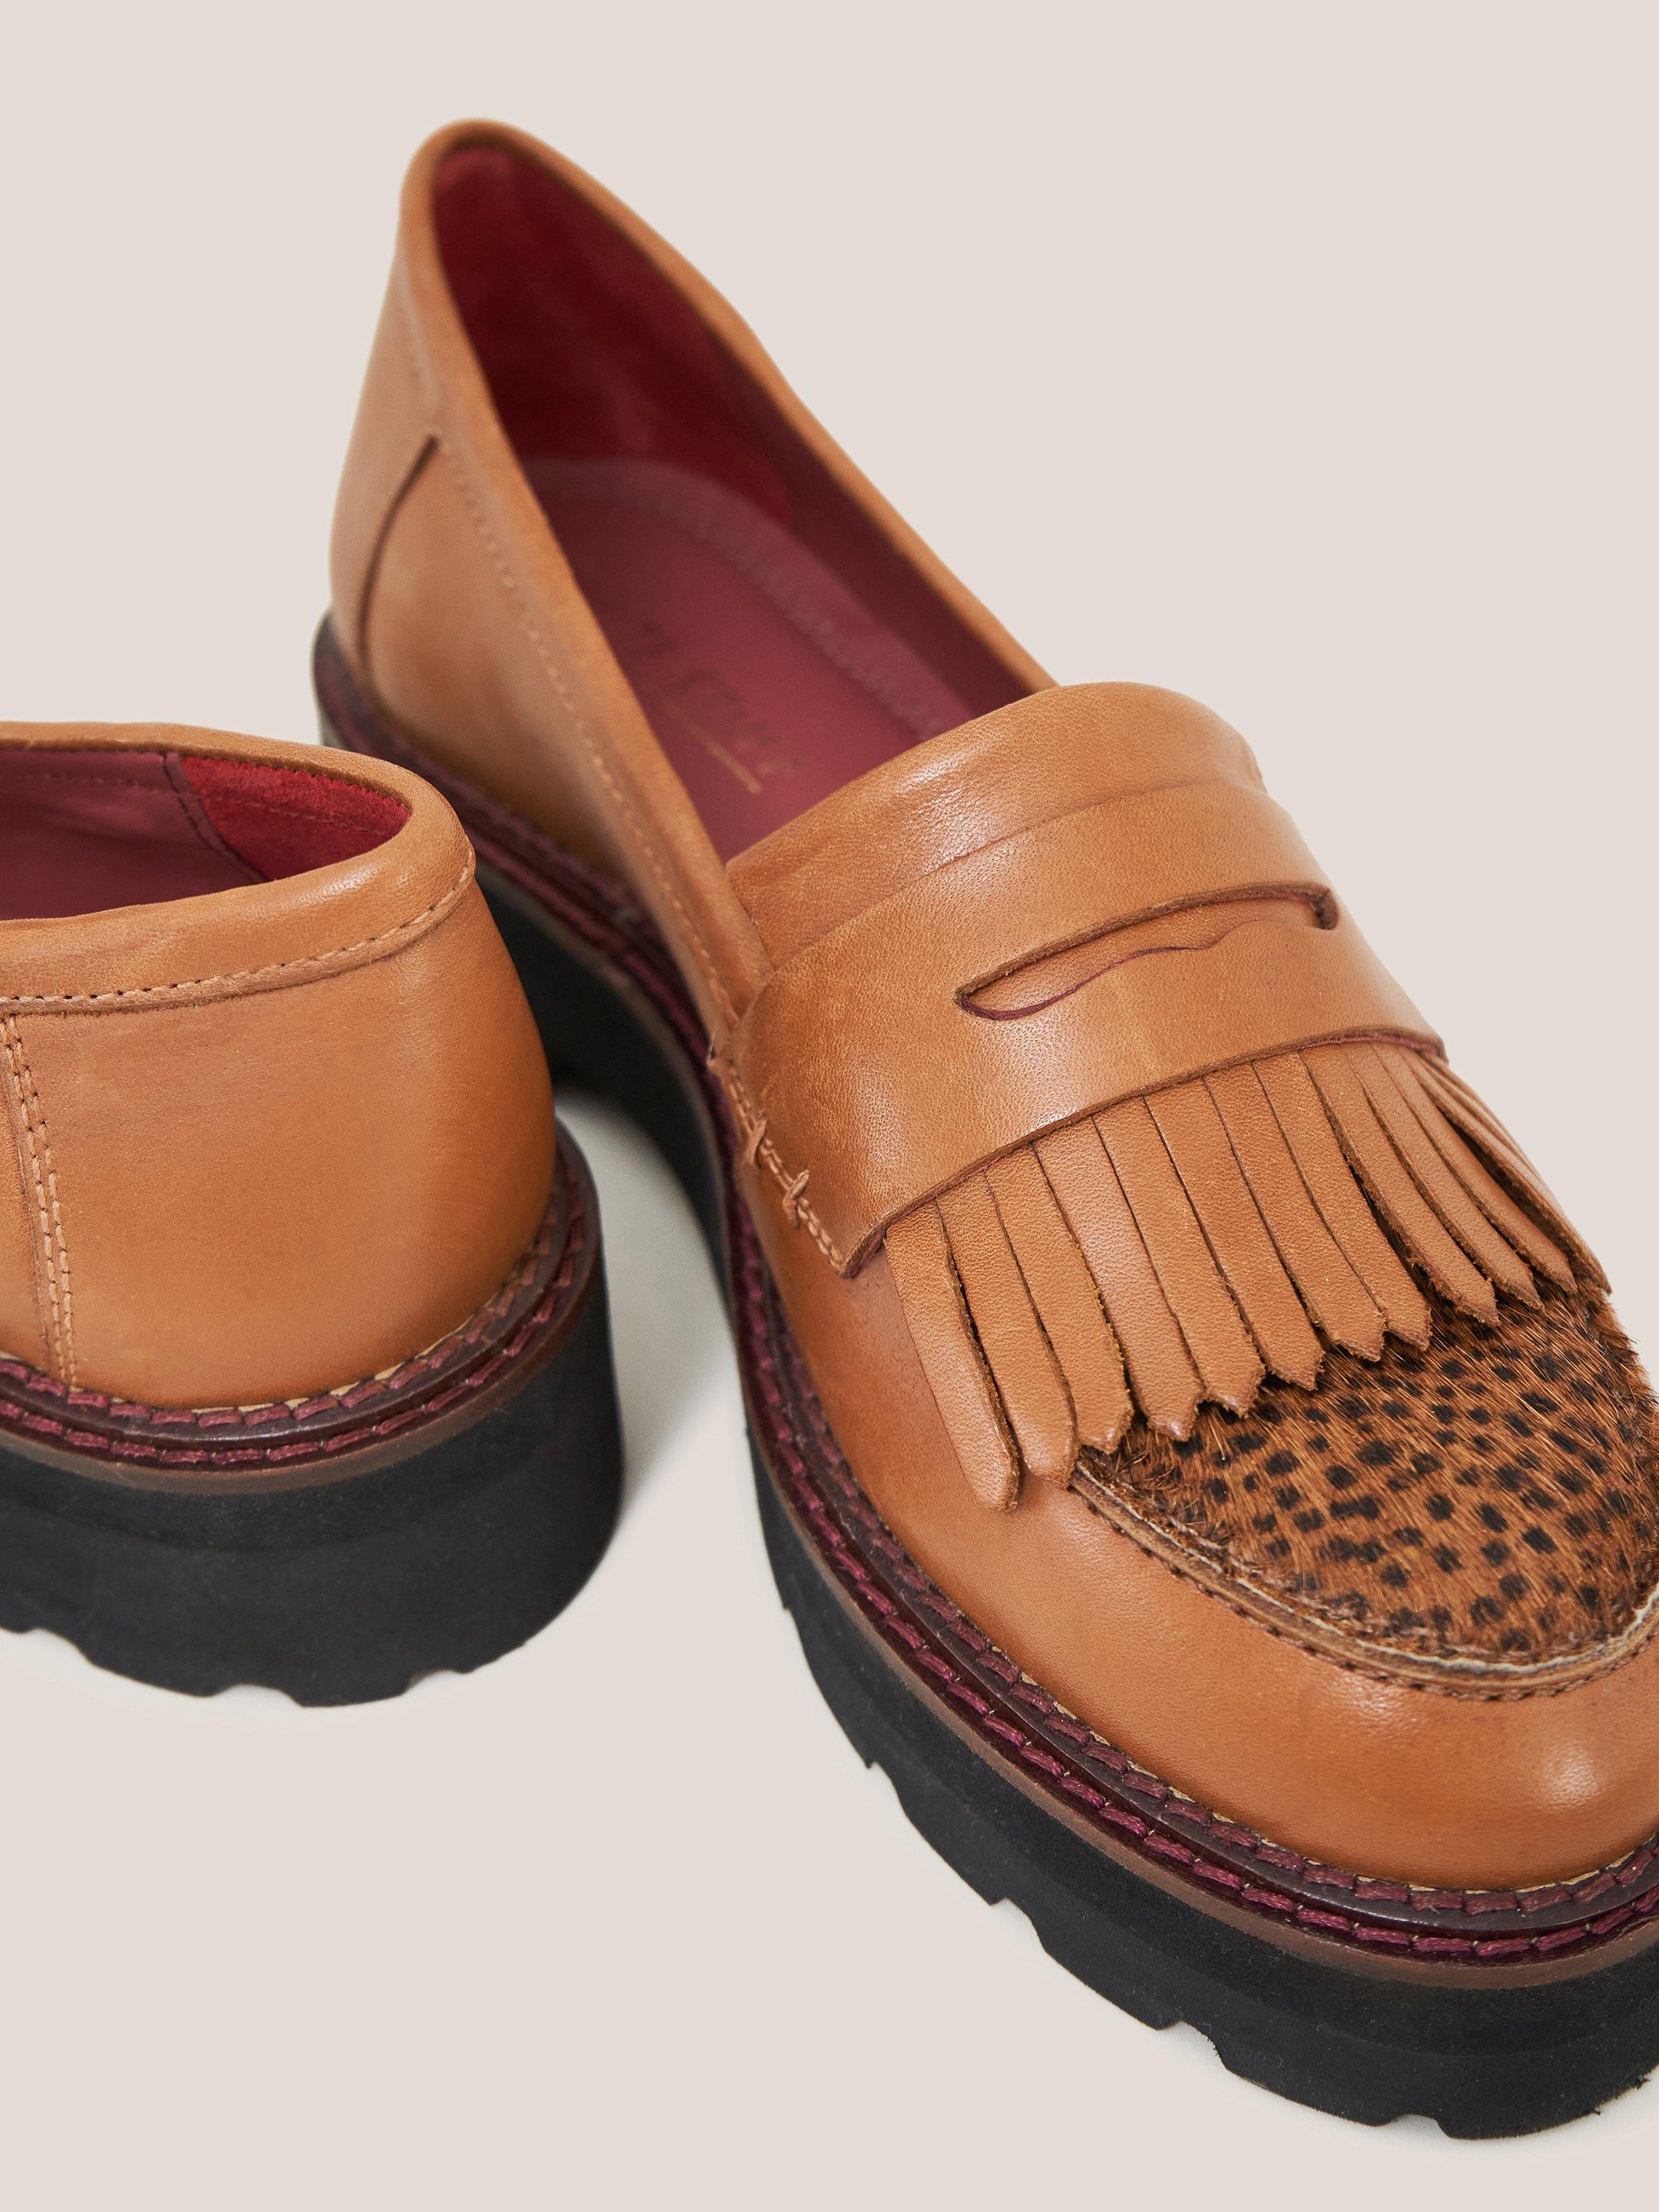 Elva Chunky Leather Loafer in TAN MULTI - FLAT DETAIL